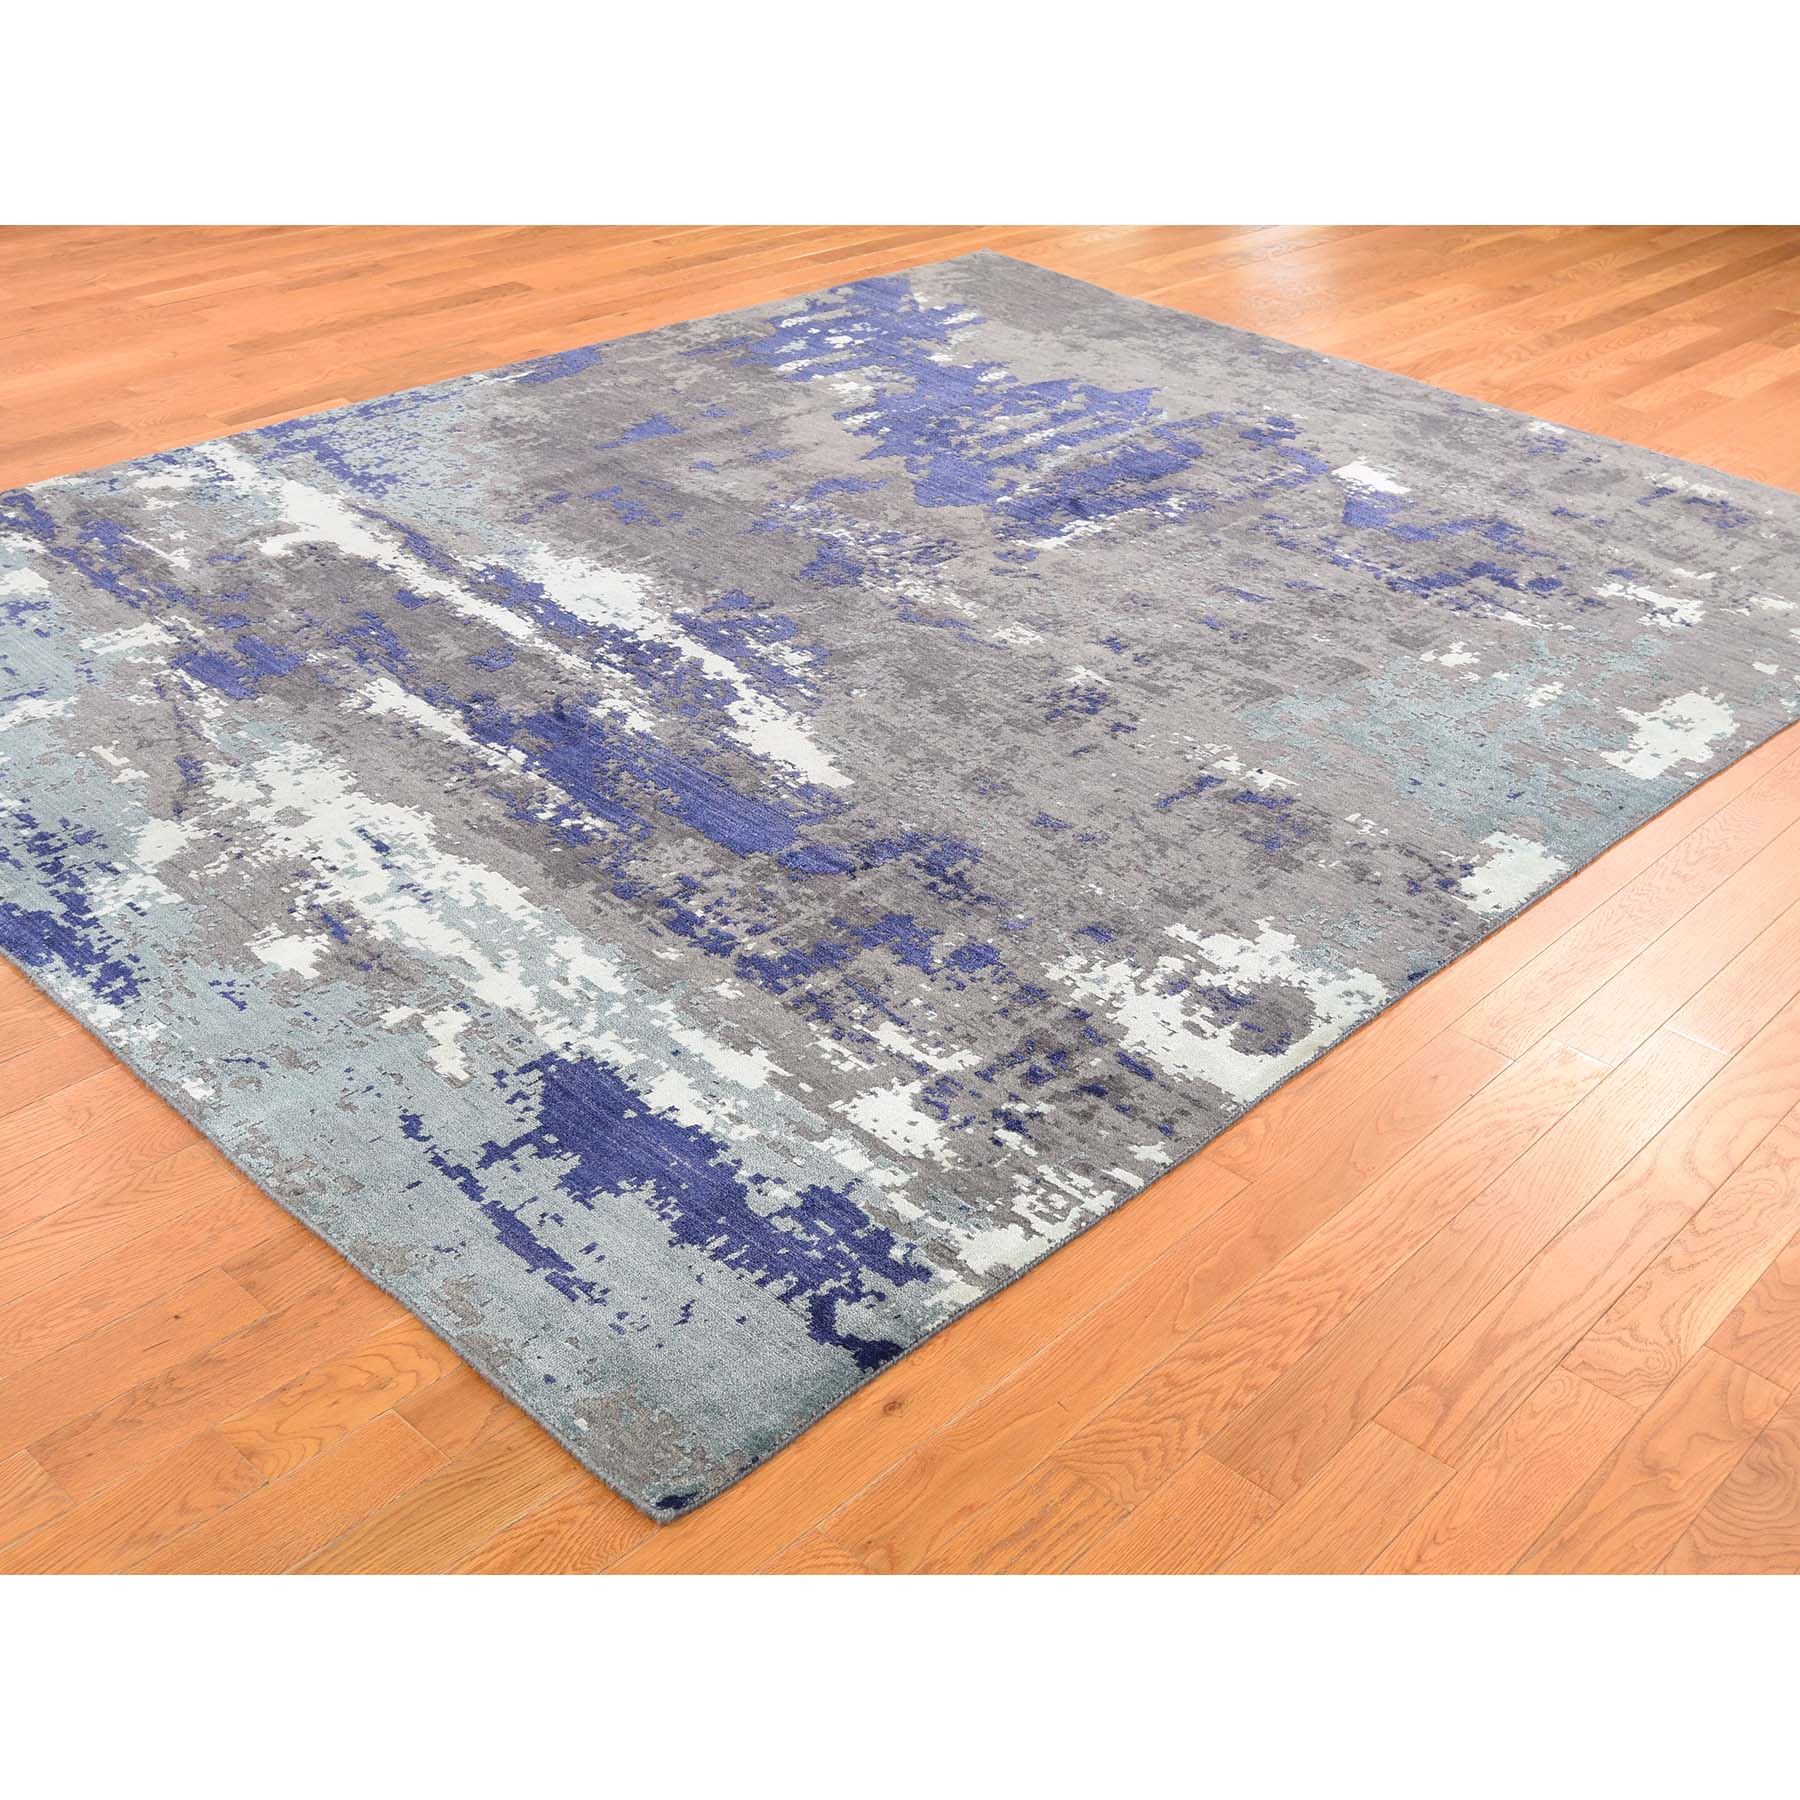 7-10 x10- Abstract Design Wool And Silk Hand-Knotted  Oriental Rug 